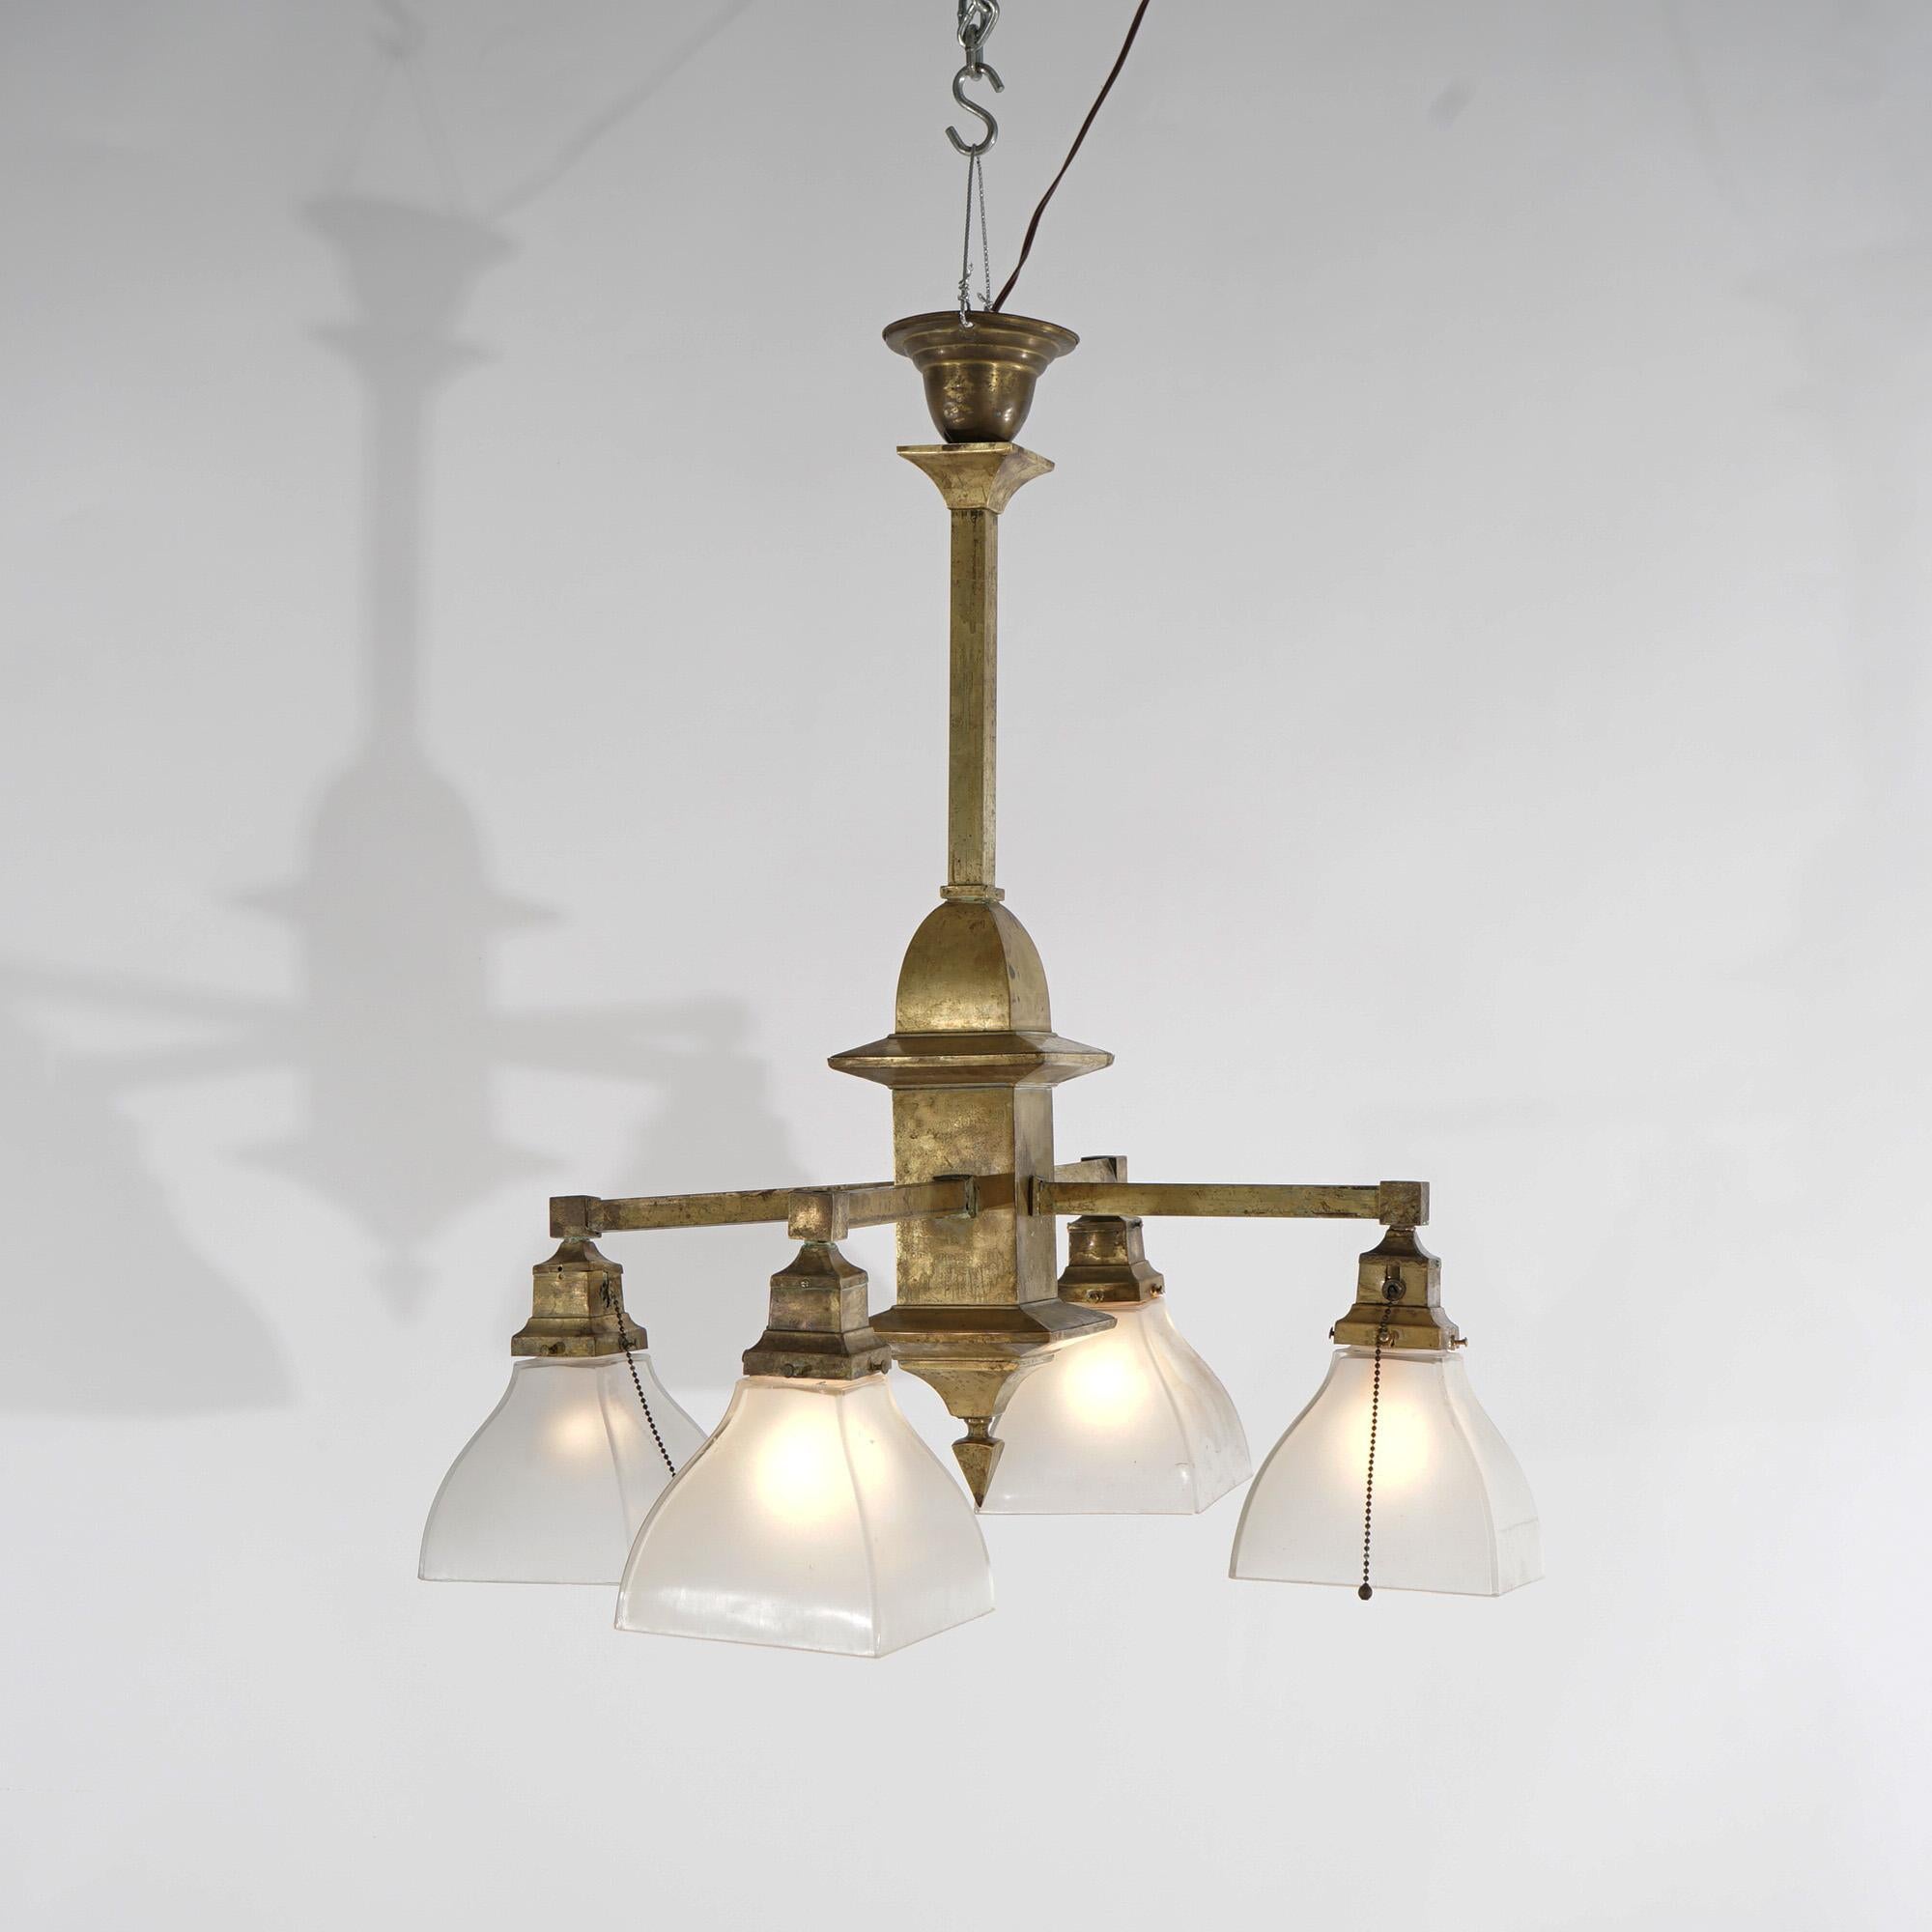 An antique Arts and Crafts Mission style chandelier offers central architectural form frame with four drop lights terminating in glass shades, c1910

Measures- 29''H x 26''W x 26''D